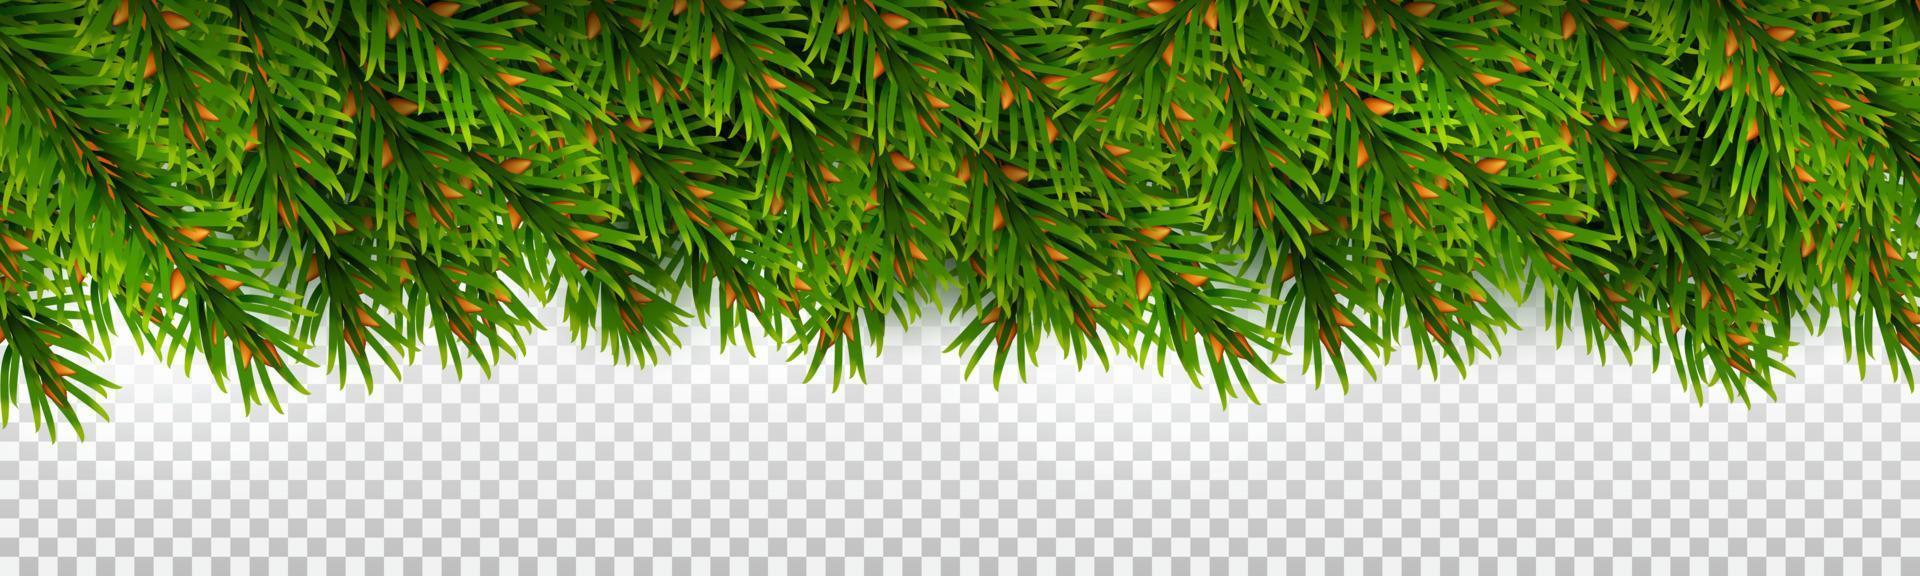 Horizontal border from evergreen spruce branches. For Christmas decorations and greeting card designs. vector